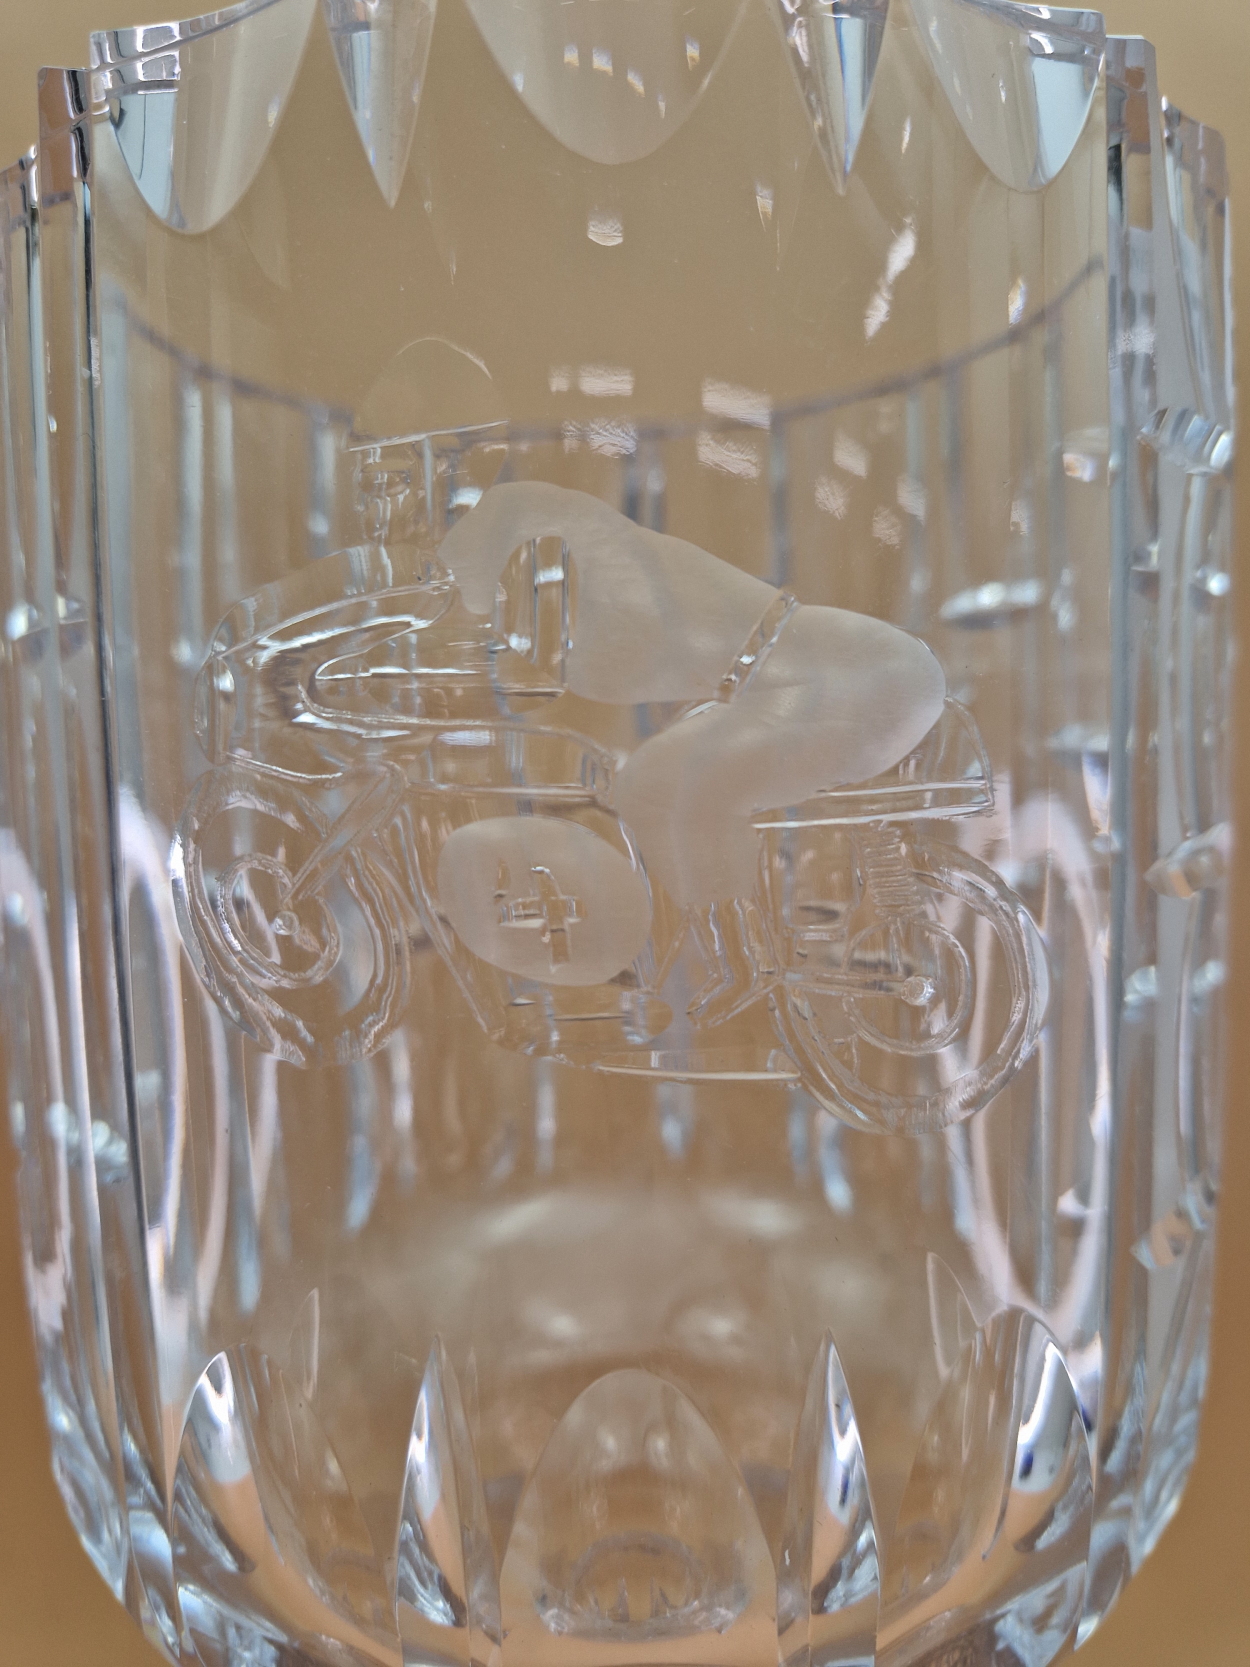 ROD GOULD. A LARGE GLASS TROPHY VASE PRESENTED TO ROD FOR 2ND PLACE IN THE 1972 YUGOSLAV GRAND - Image 2 of 5